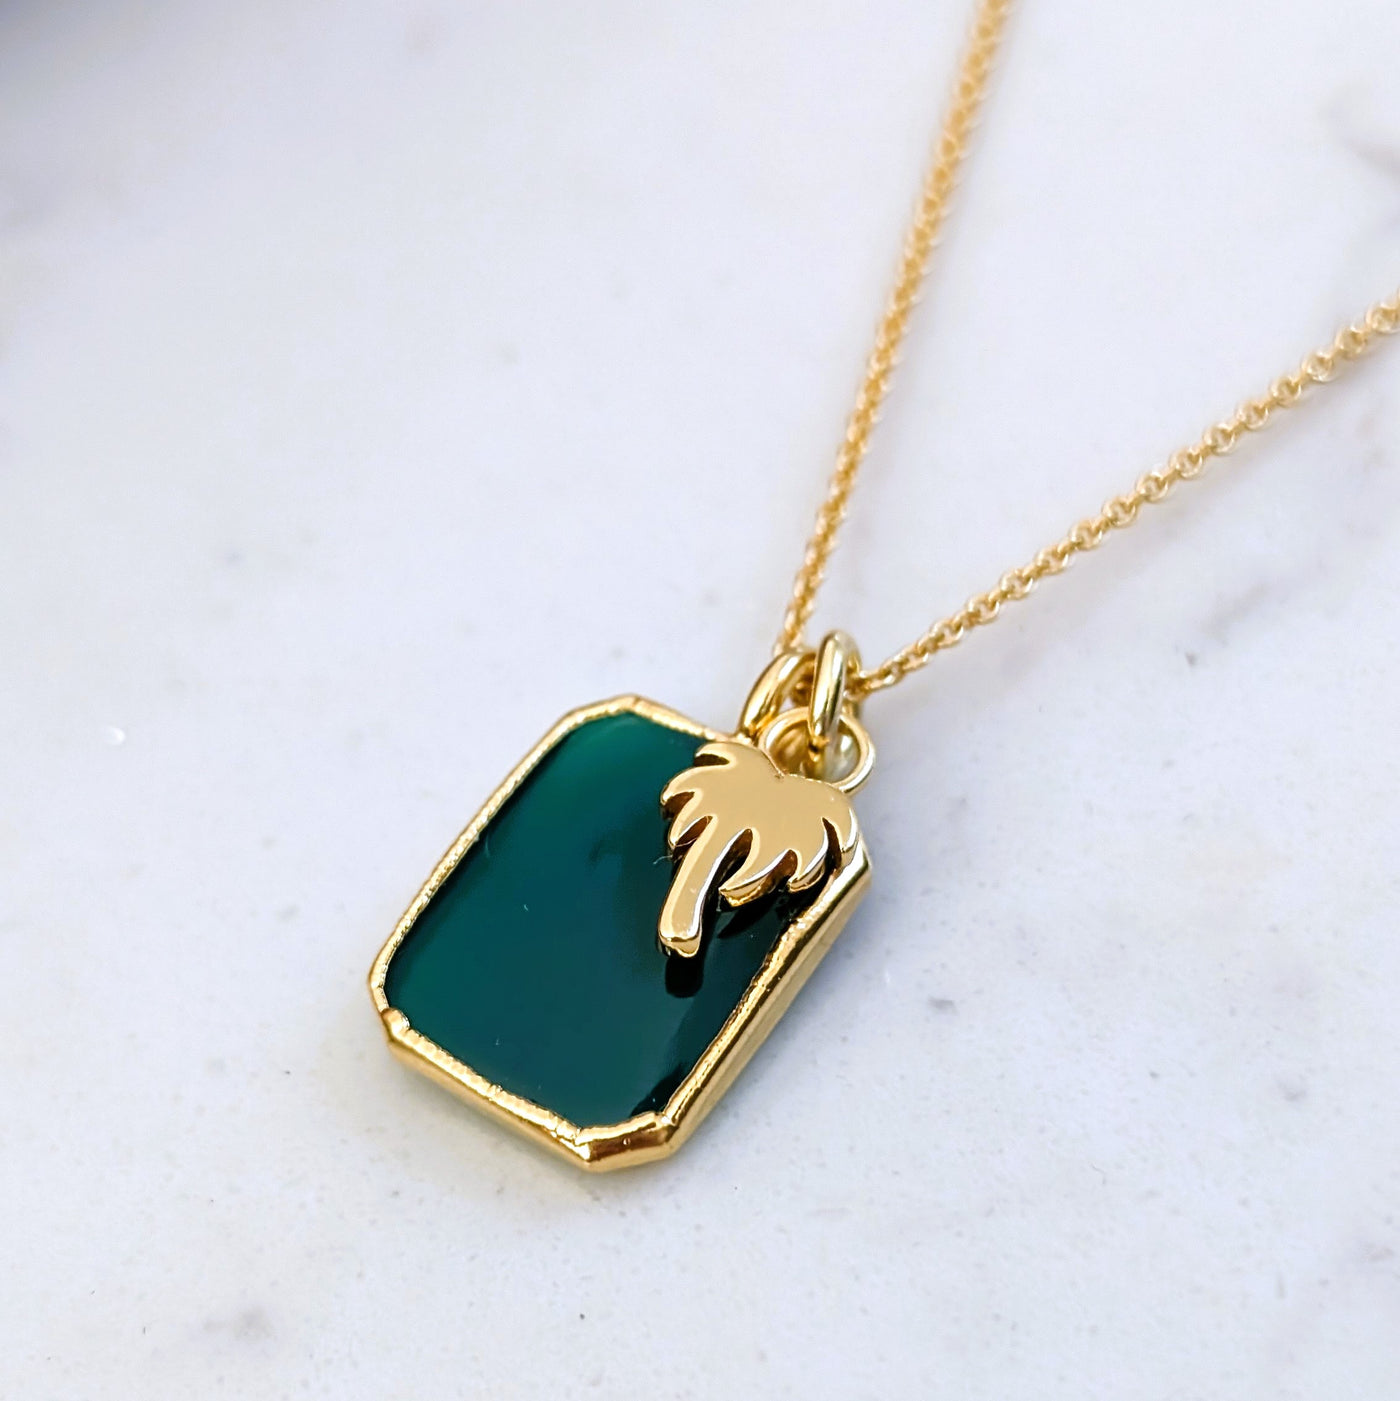 The Duo Green Onyx Necklace